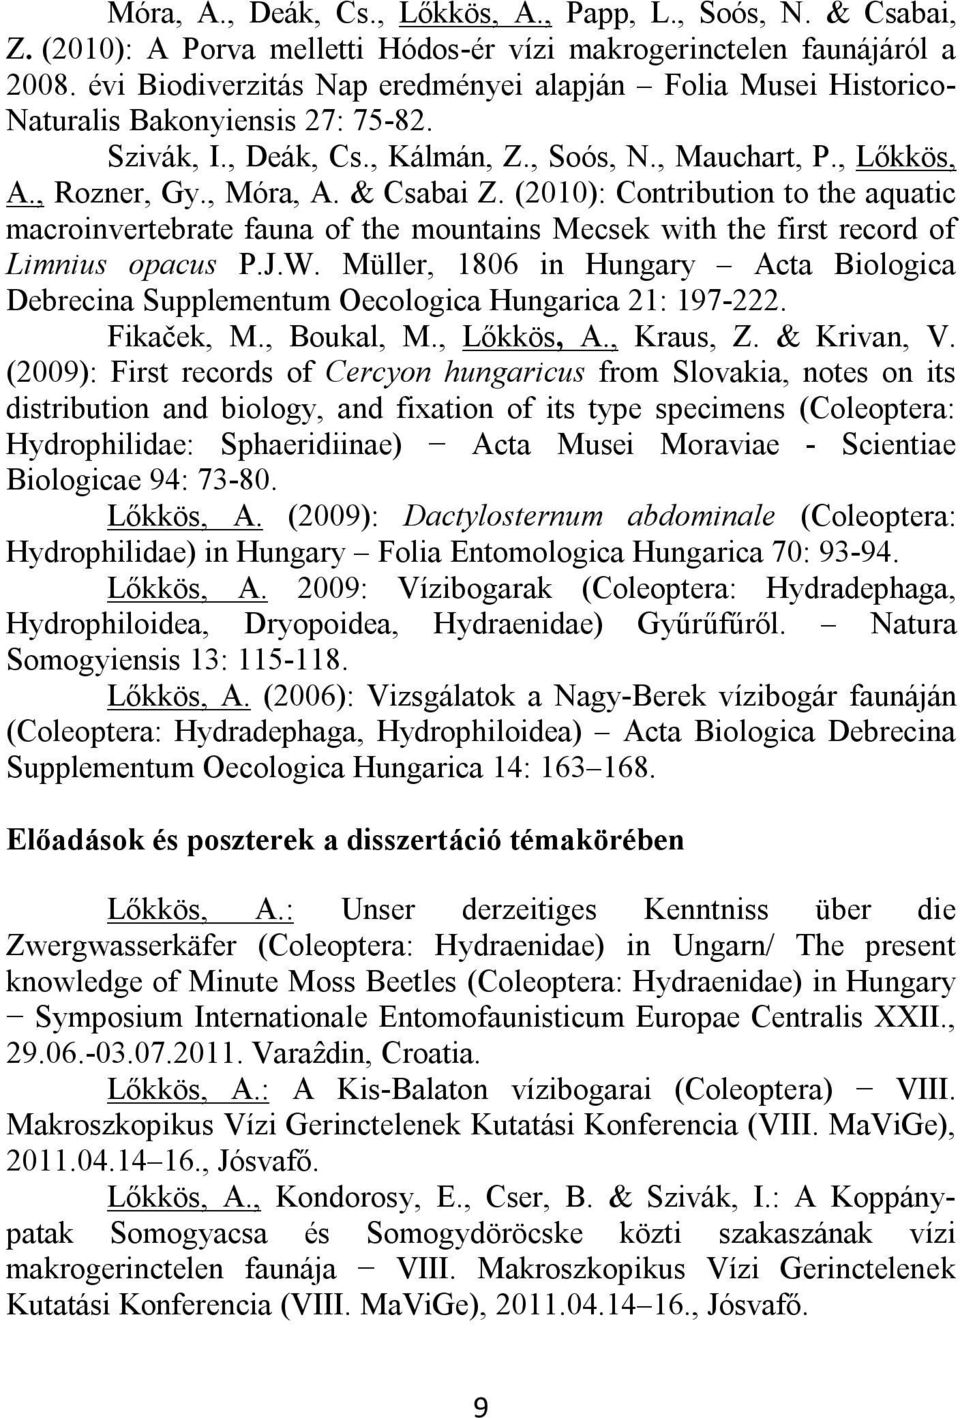 & Csabai Z. (2010): Contribution to the aquatic macroinvertebrate fauna of the mountains Mecsek with the first record of Limnius opacus P.J.W.